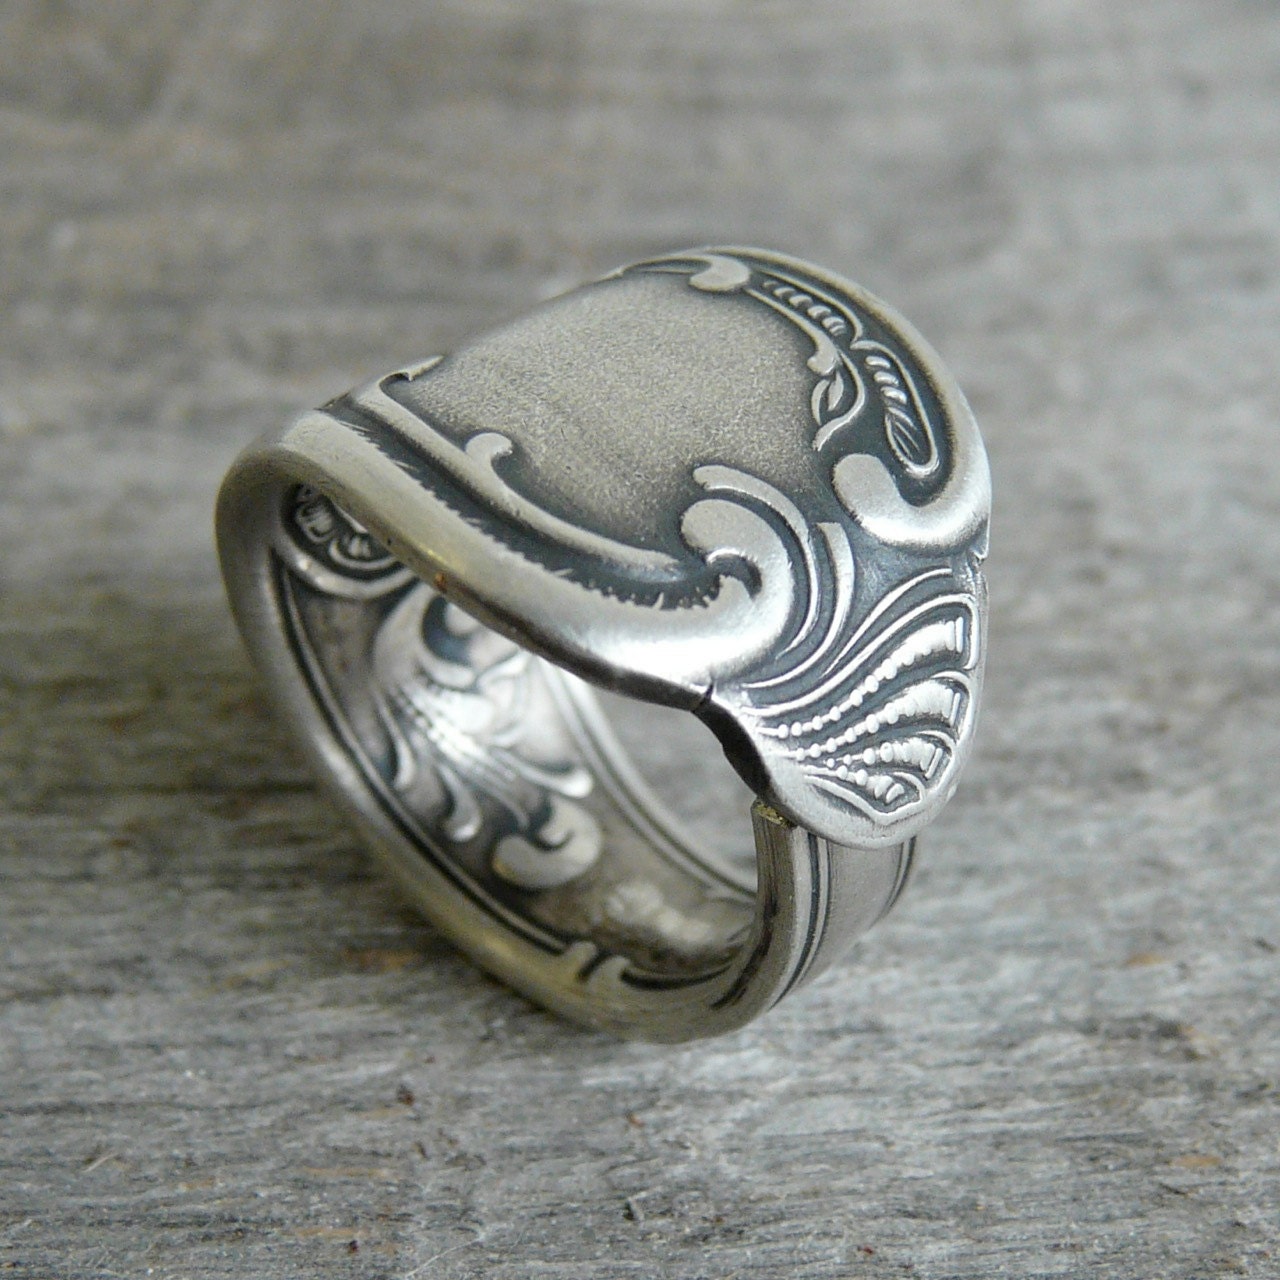 Antique Silver Spoon Ring by Revisions on Etsy